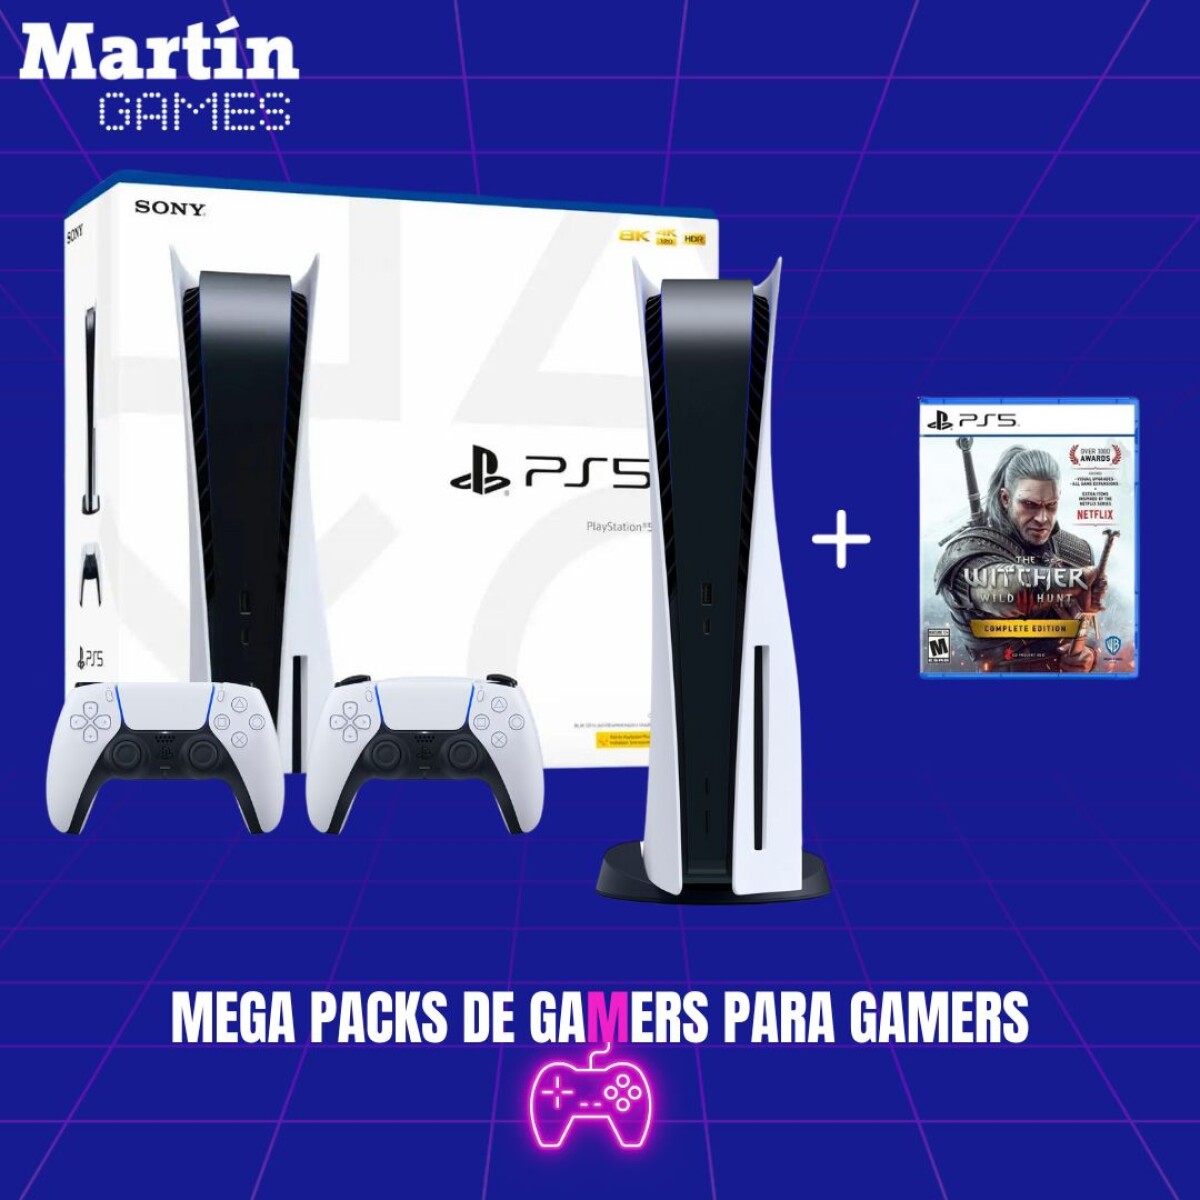 PS5 0KM CON LECTORA + THE WITCHER 3 + JOYSTICK EXTRA 